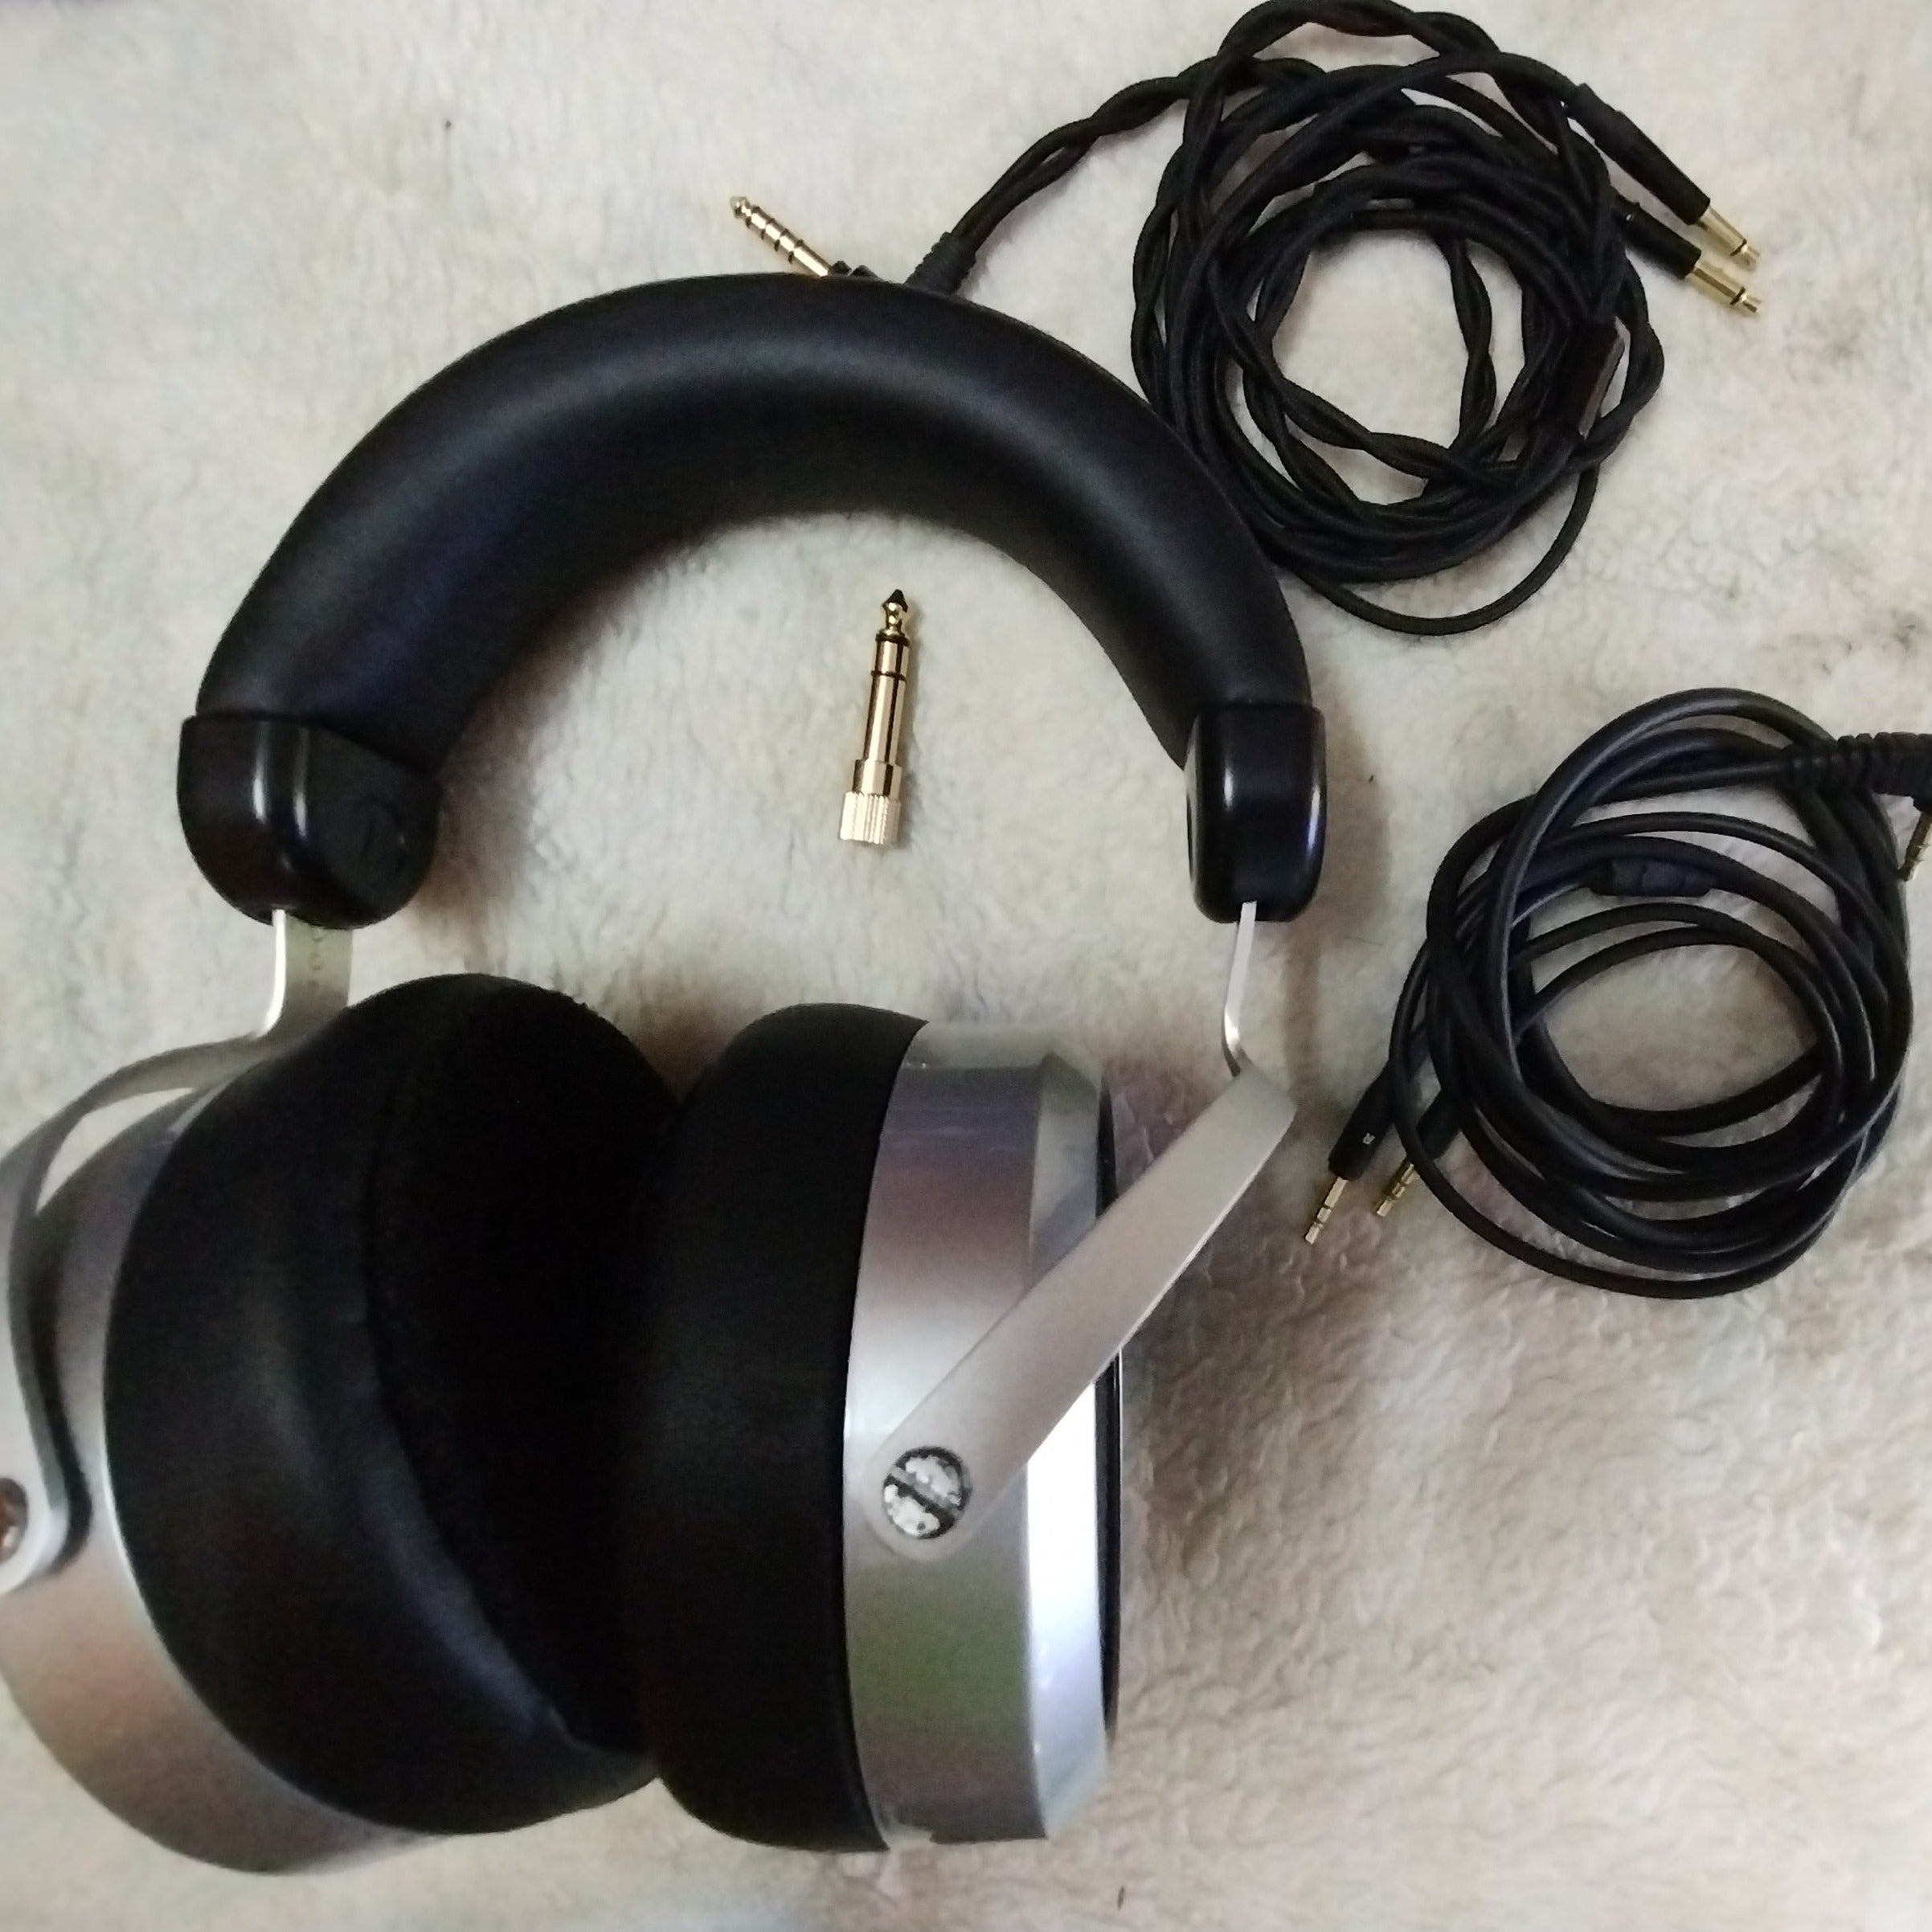 HiFiMAN - HE400se (Pre-Owned)